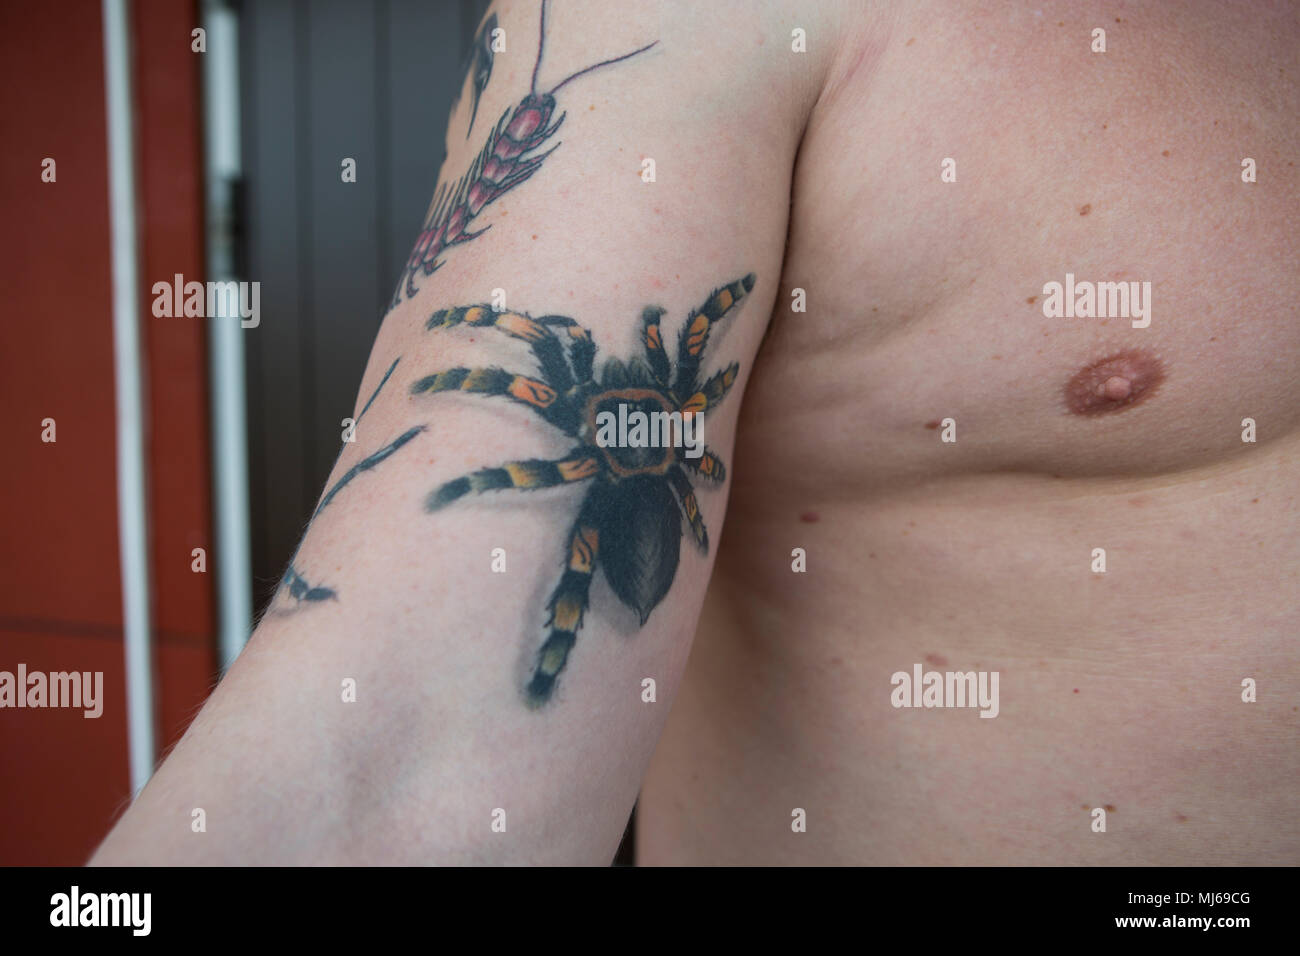 A man with tattooed insects on the body, Sweden. Stock Photo